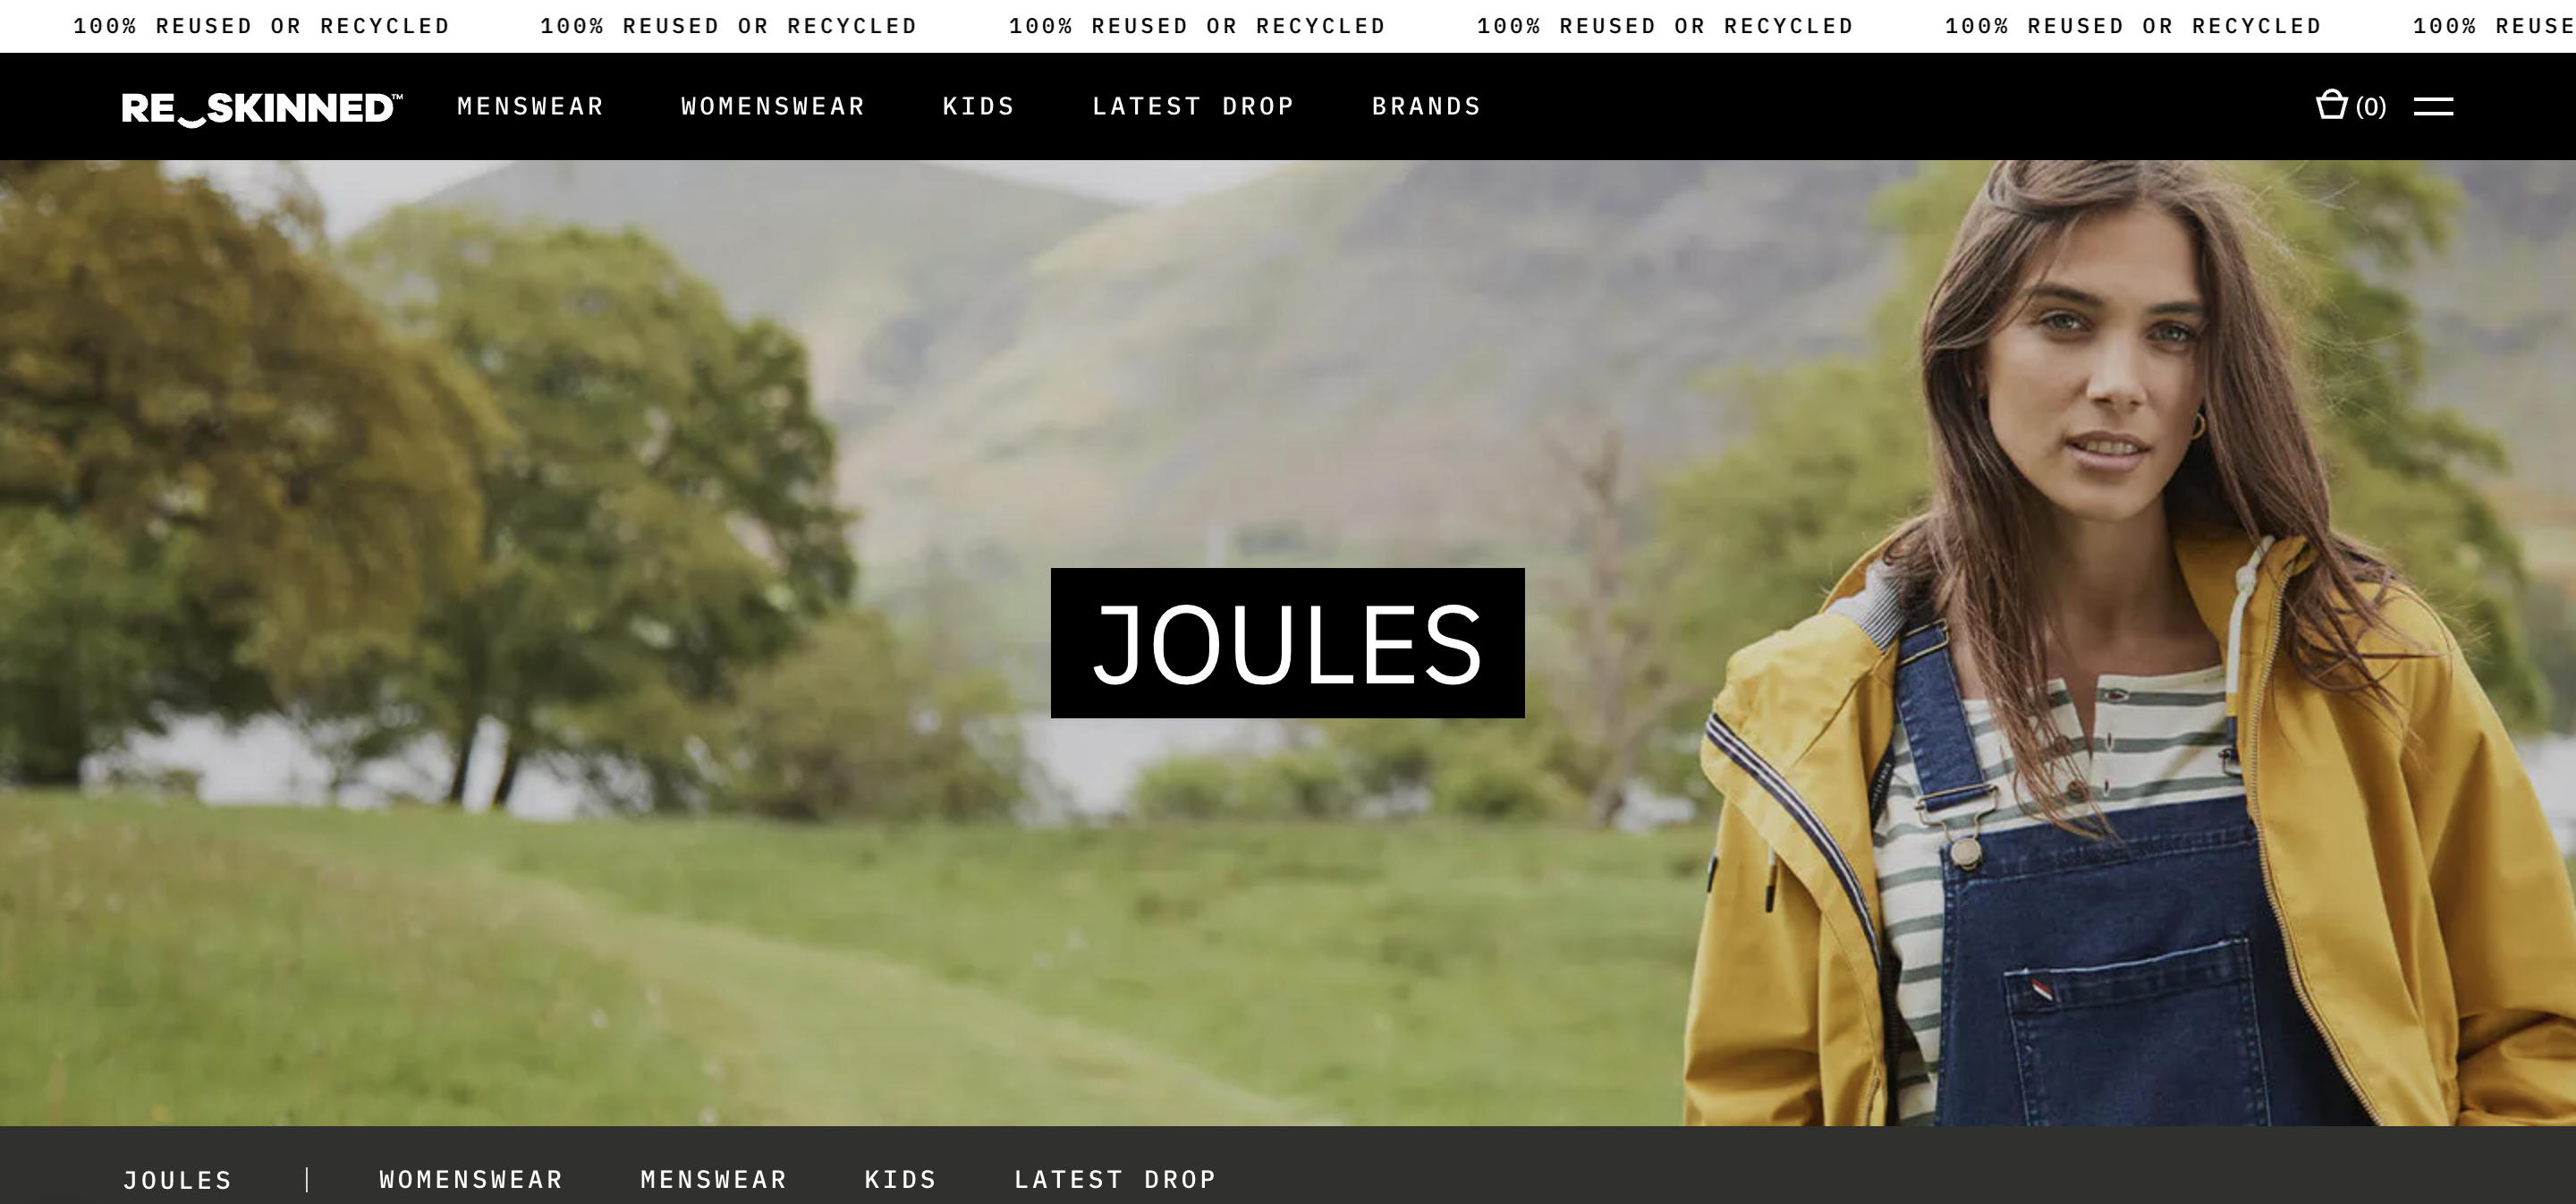 Joules launches resale service with Reskinned